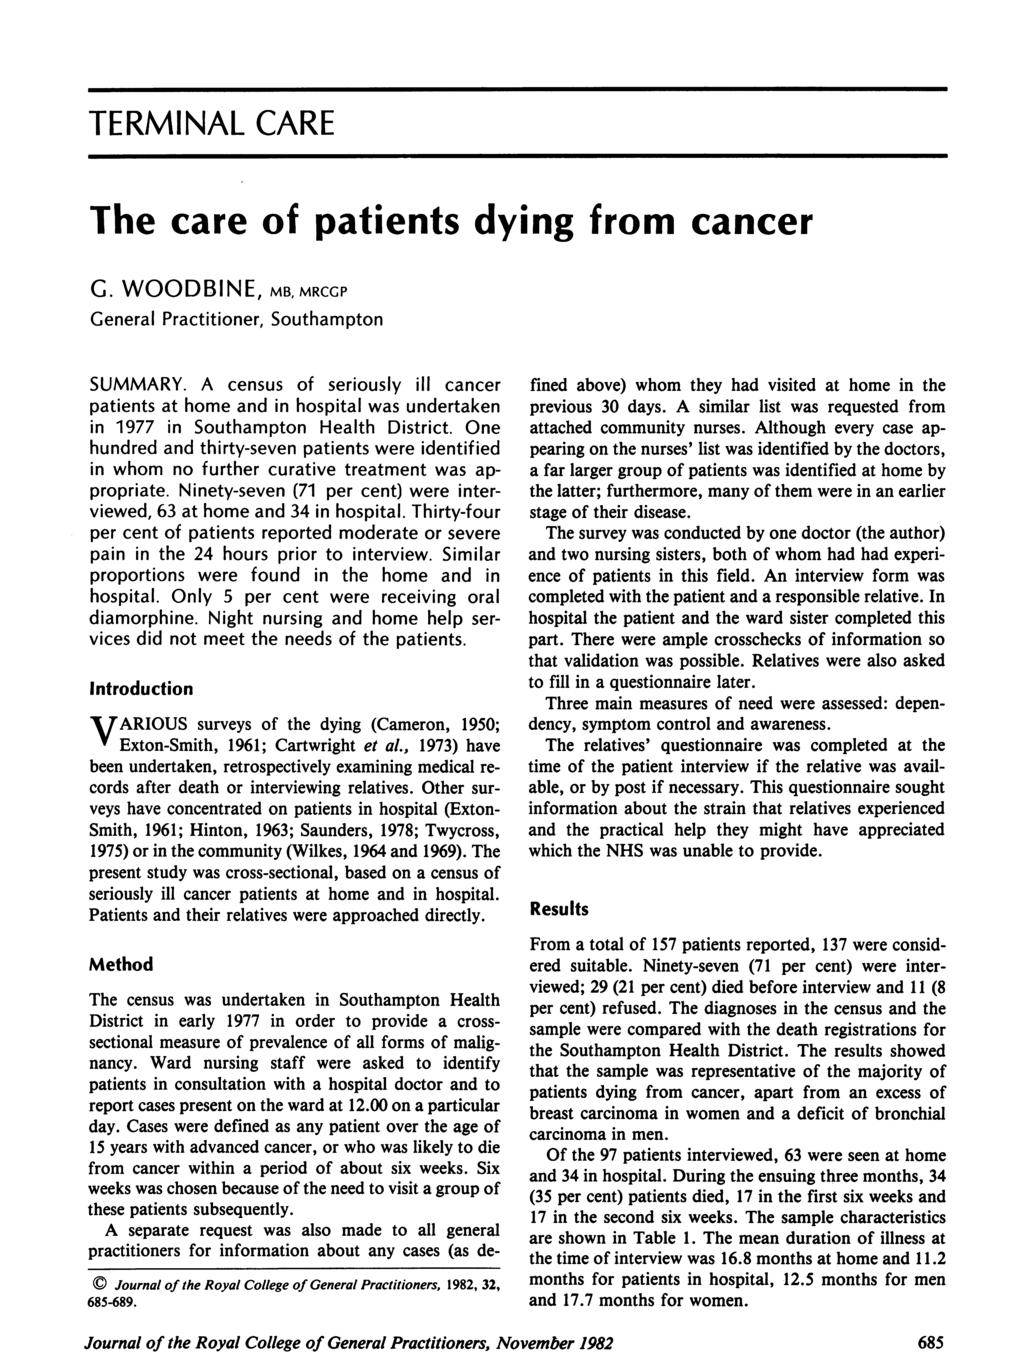 TERMINAL CARE The care of patients dying from cancer G. WOODBINE;mb,mrccp General Practitioner, Southampton SUMMARY.